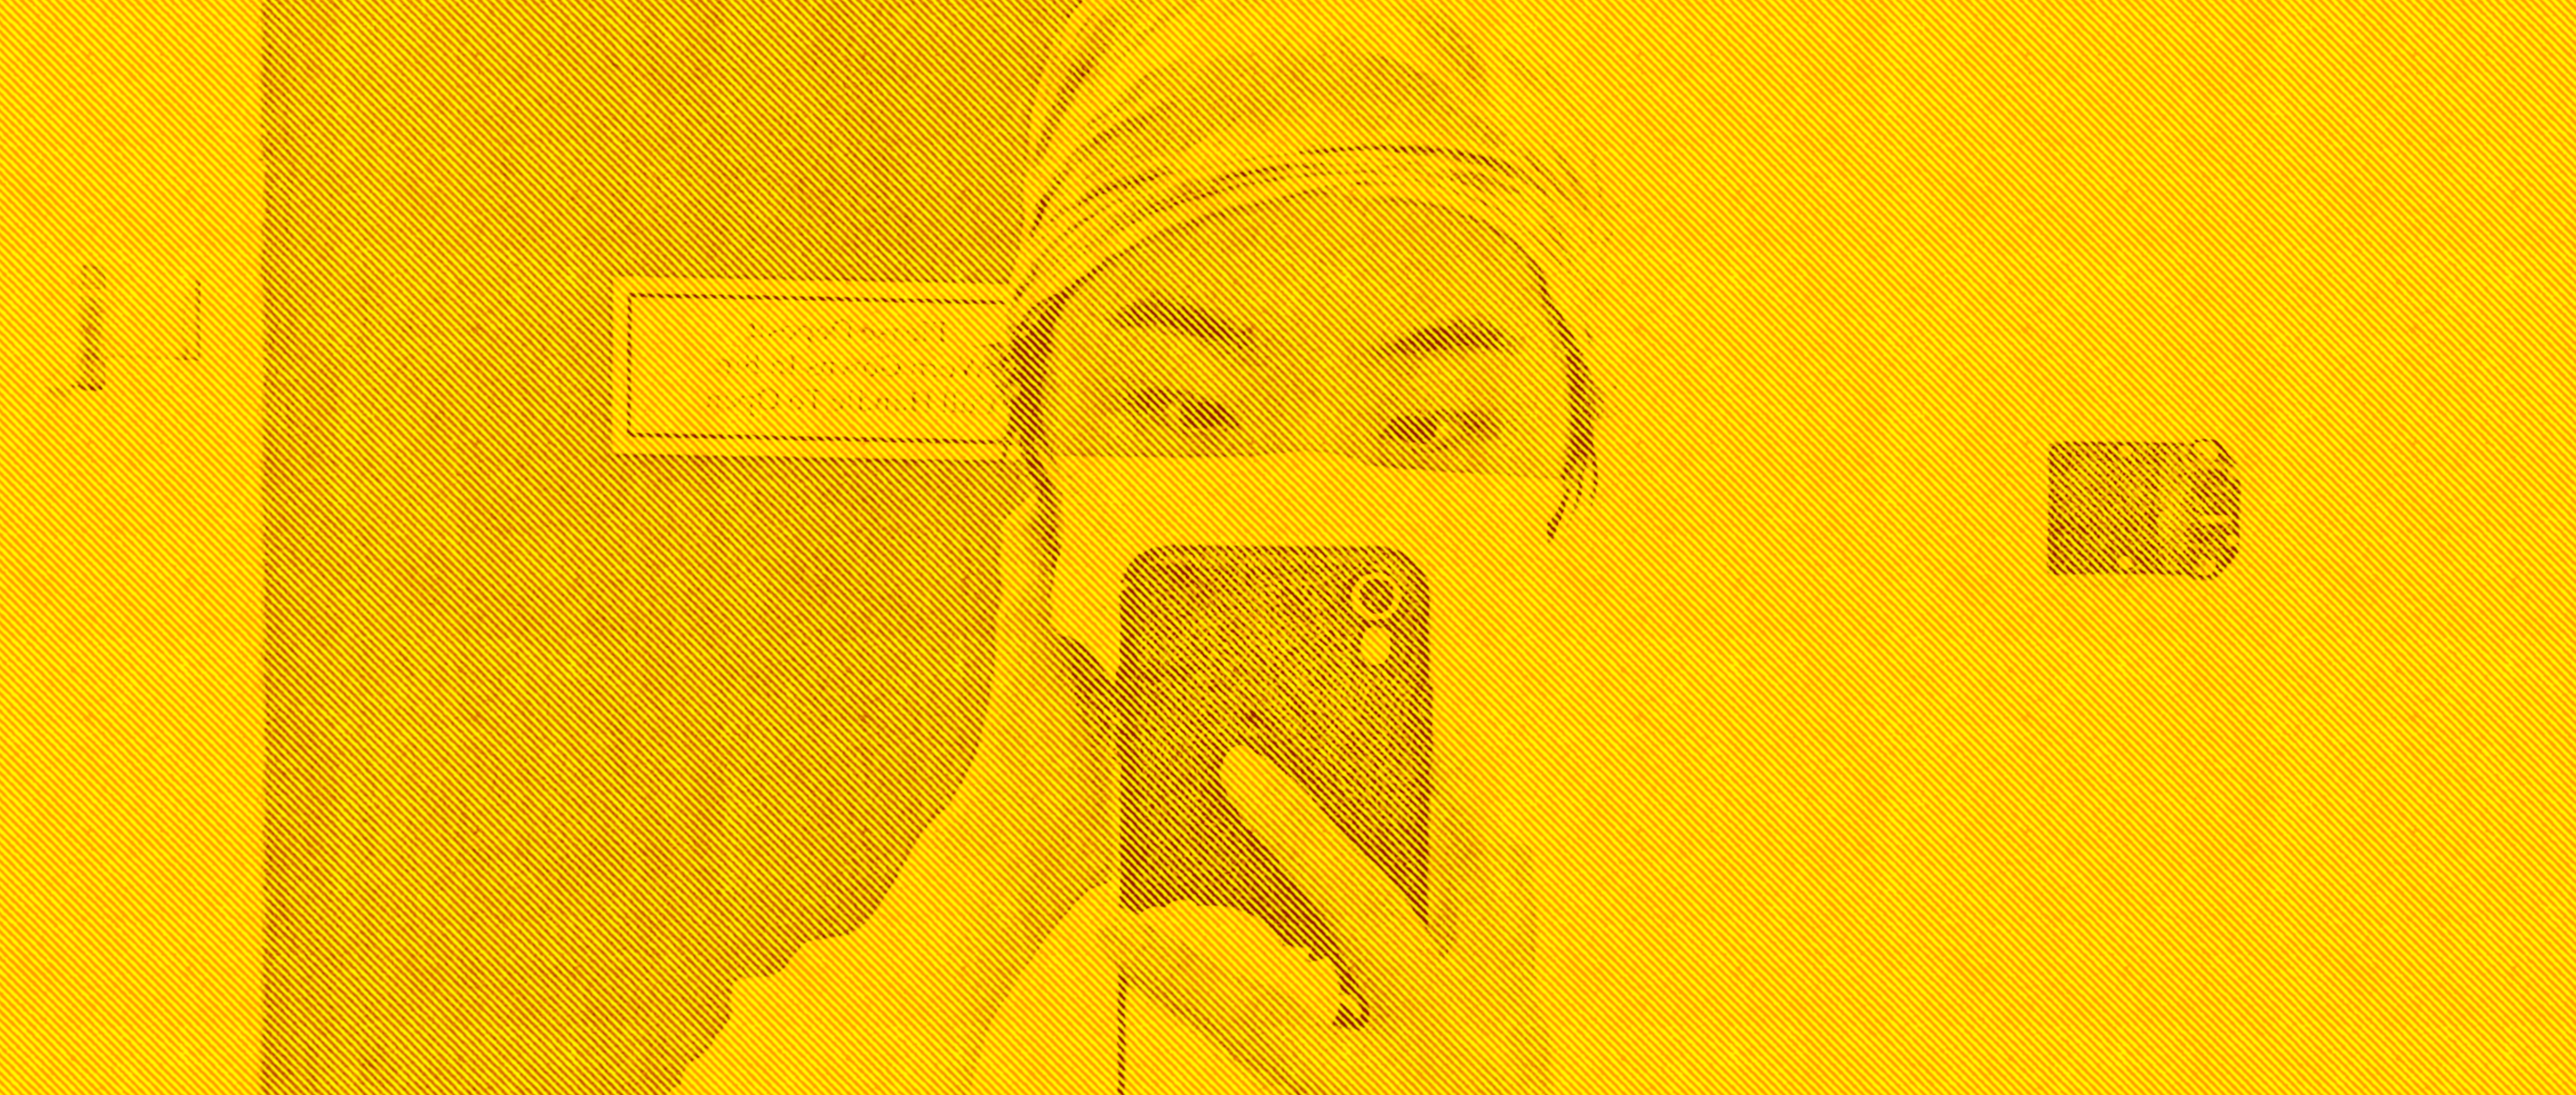 A young woman cancer patient wearing a headwrap takes a photo in the mirror